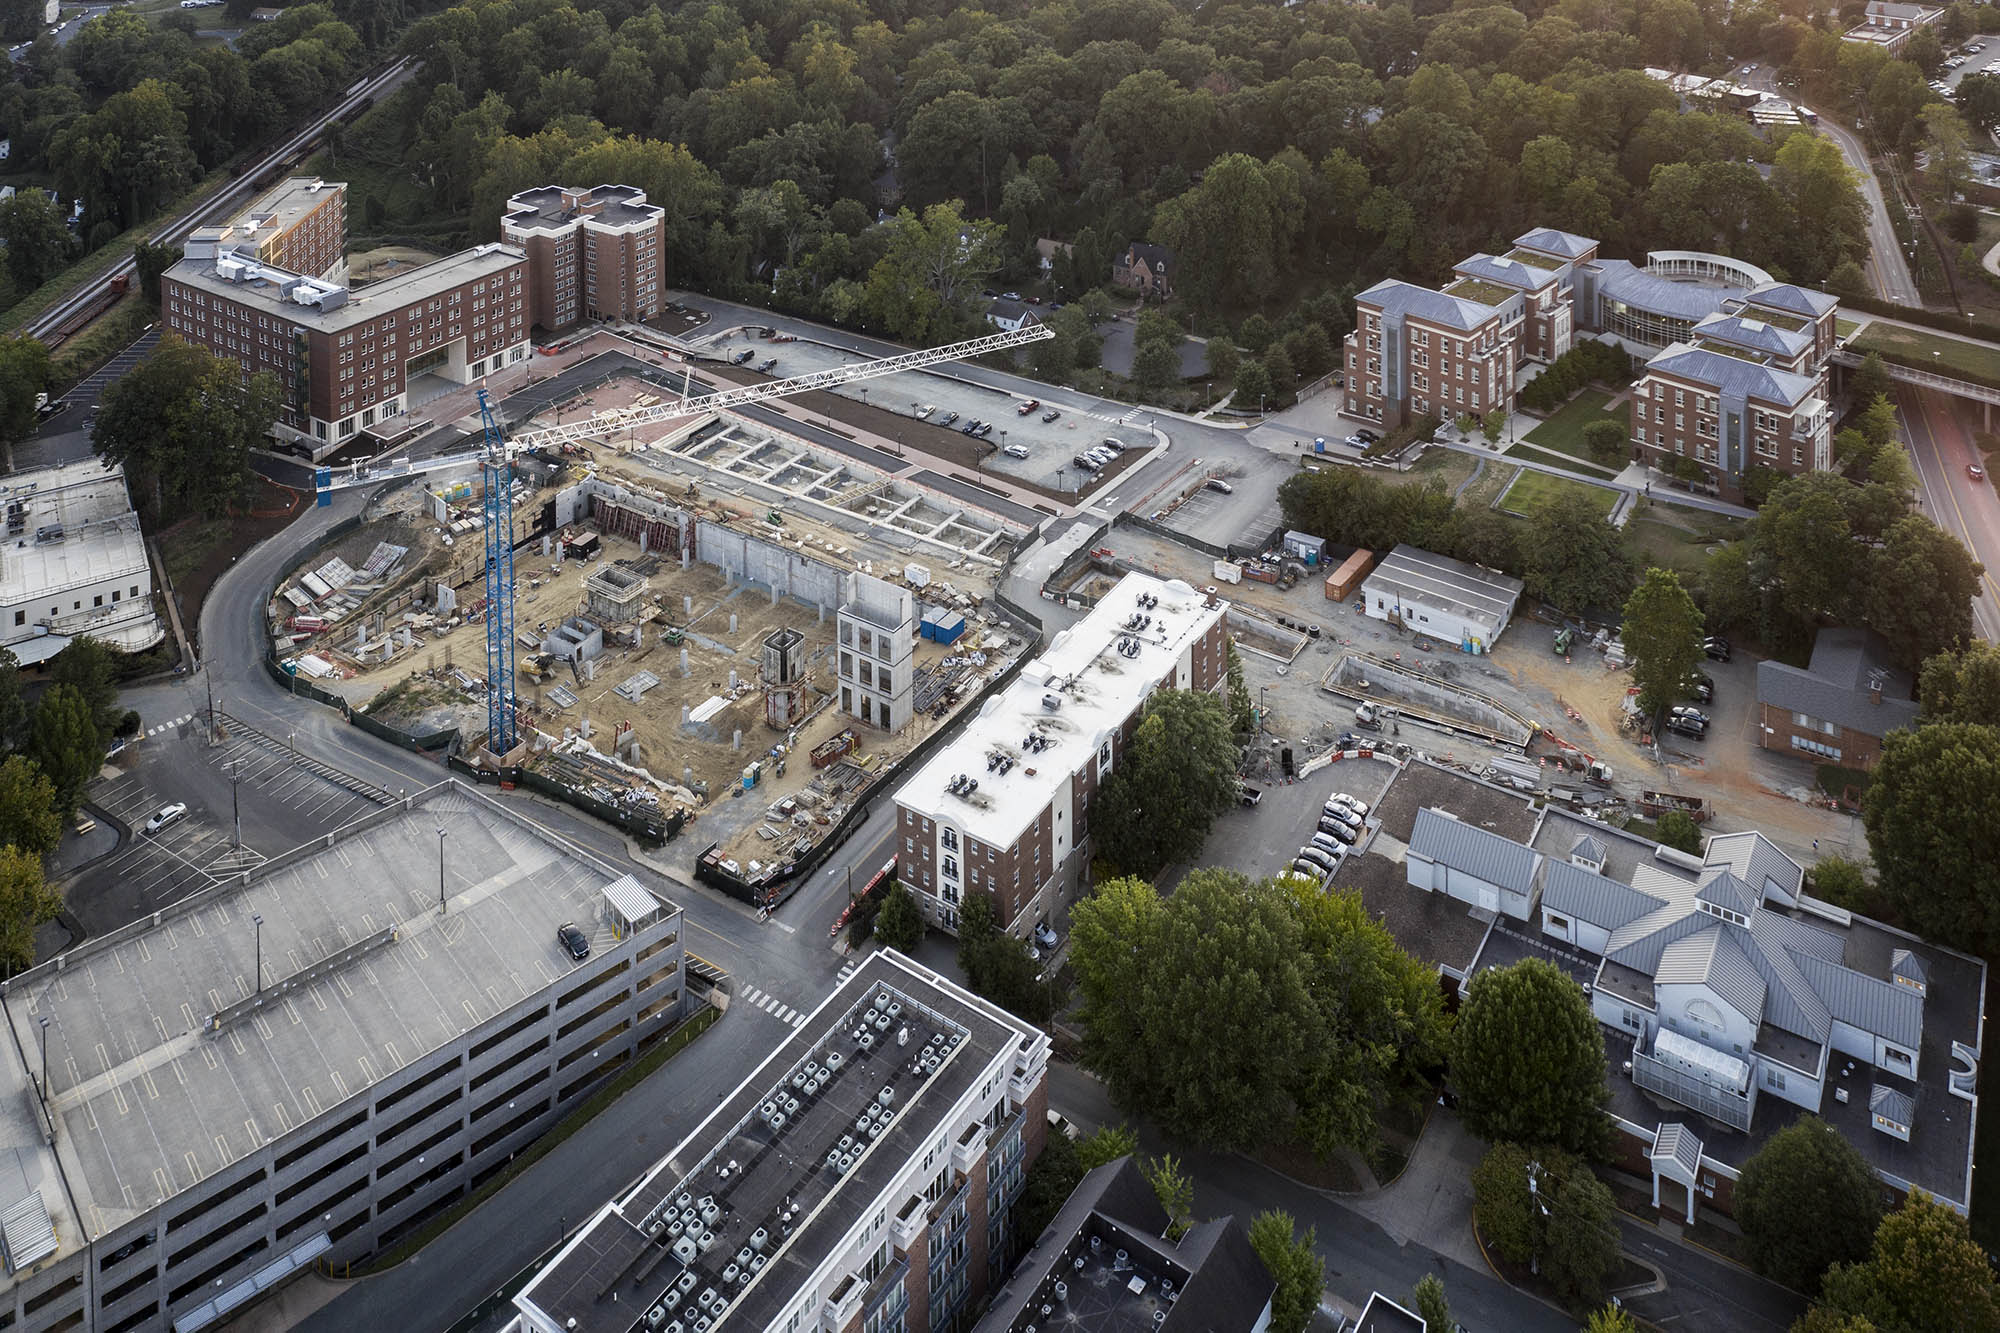 Arial view of the construction project from Brandon Avenue